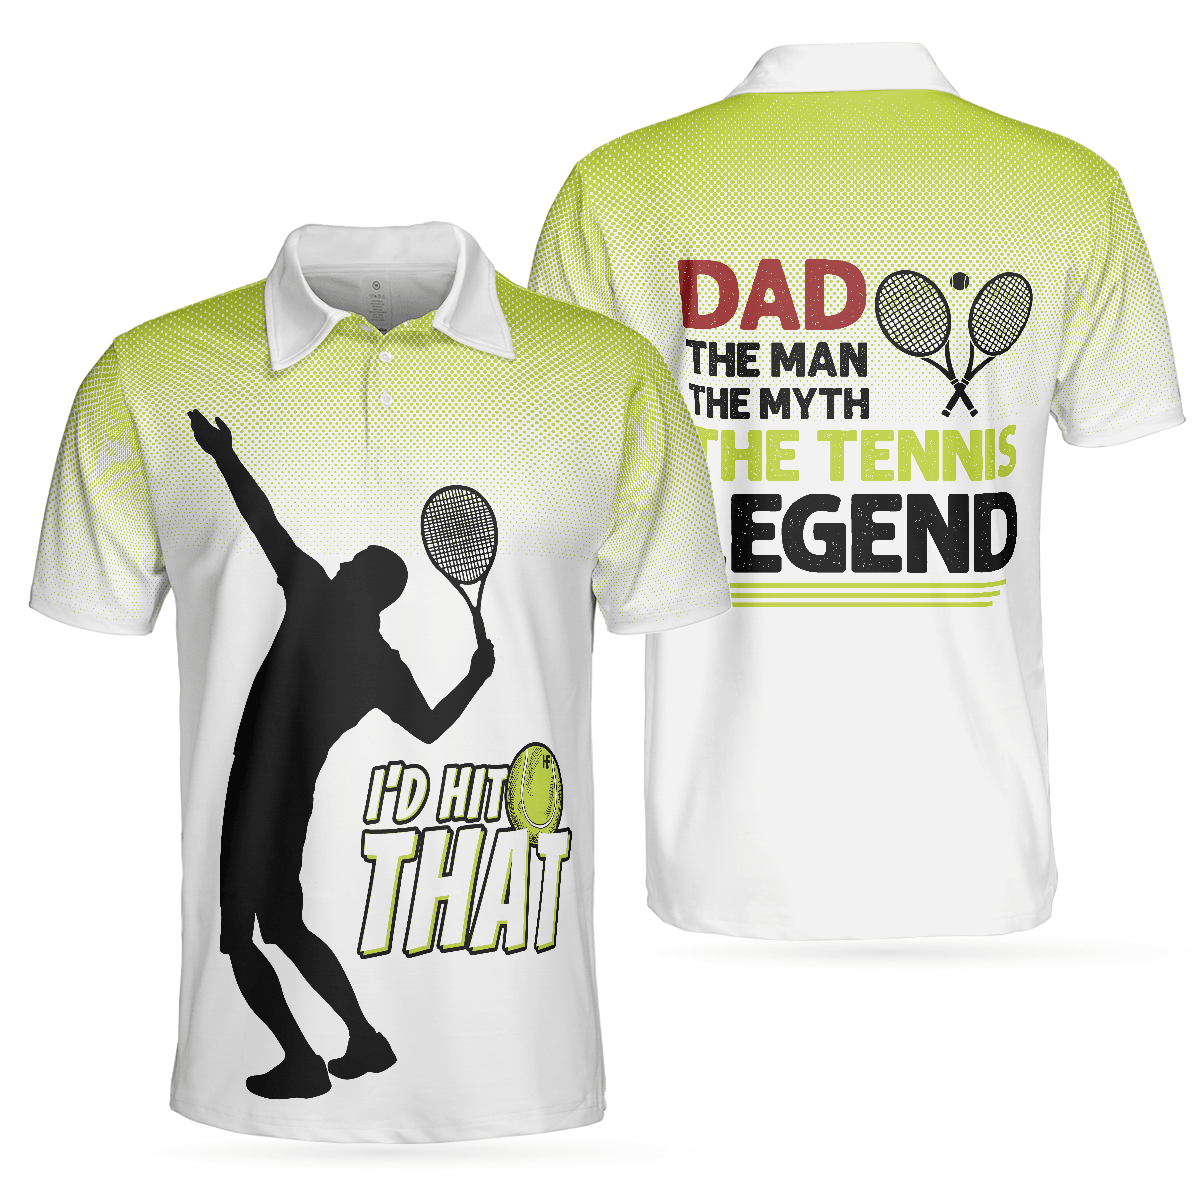 Tennis Men Polo Shirt, Dad The Man The Myth The Tennis Legend Polo shirts, Unique Tennis Gifts For Dad, Tennis Lovers And Players, Father's Day - Amzanimalsgift